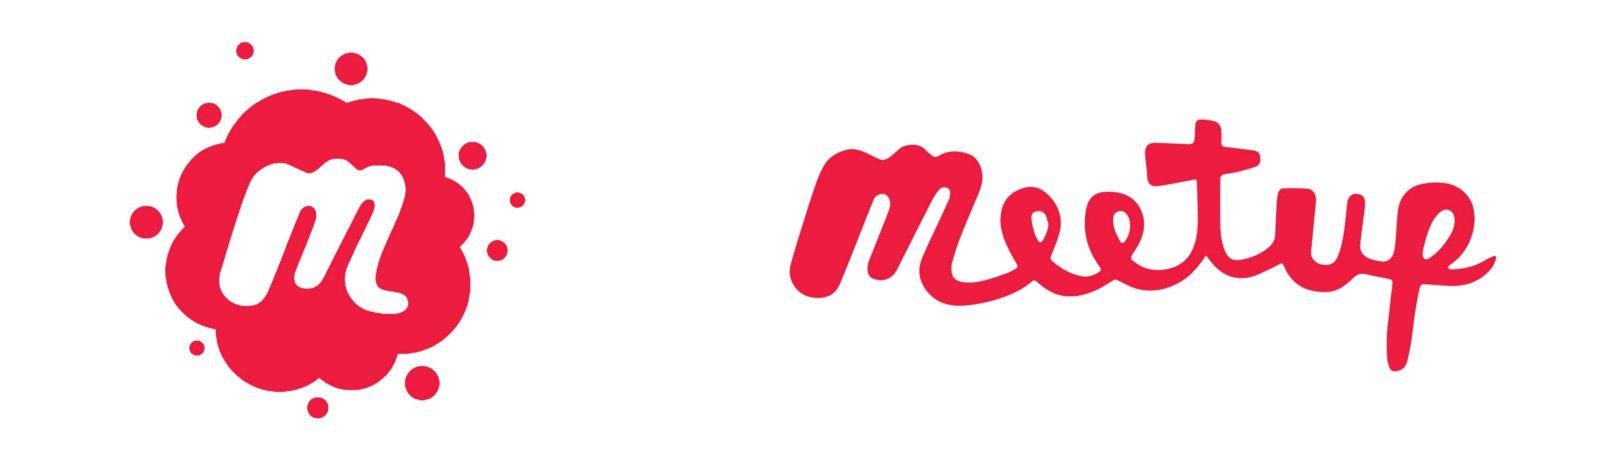 Meetup Logo - Top 10 Most Influential Rebrands of 2016: Meetup – Look and Logo ...